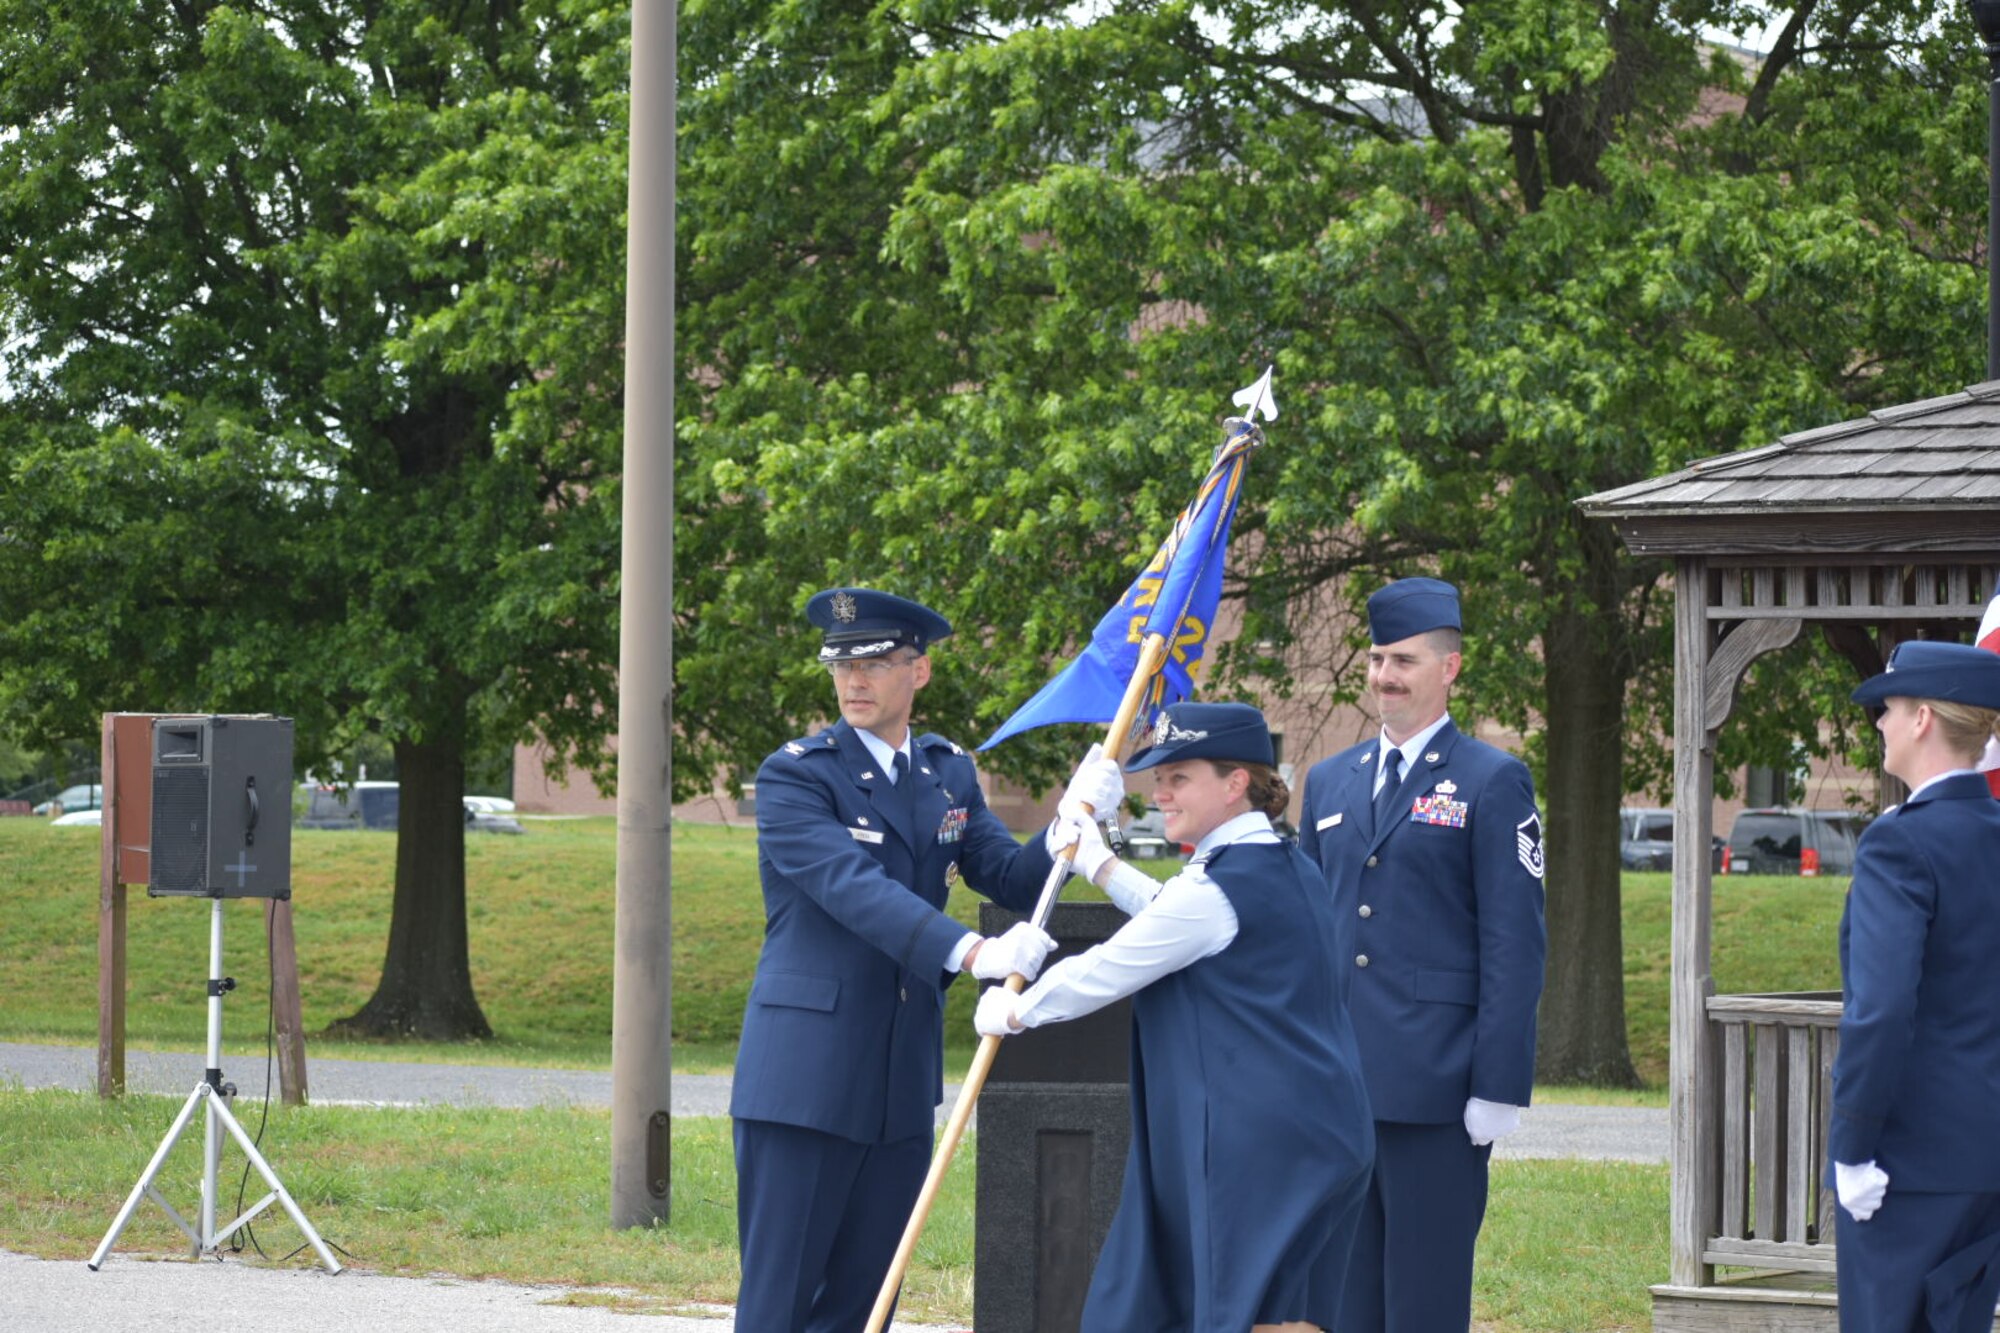 Lt. Col. Hallie Herrera takes command of the 22nd Intelligence Squadron from Col. Charles Freel, commander of the 691st Intelligence Surveillance and Reconnaissance Group in a ceremony at Fort George G. Meade, Md., June 16, 2020. (U.S. Air Force courtesy photo by Felix Herrera)